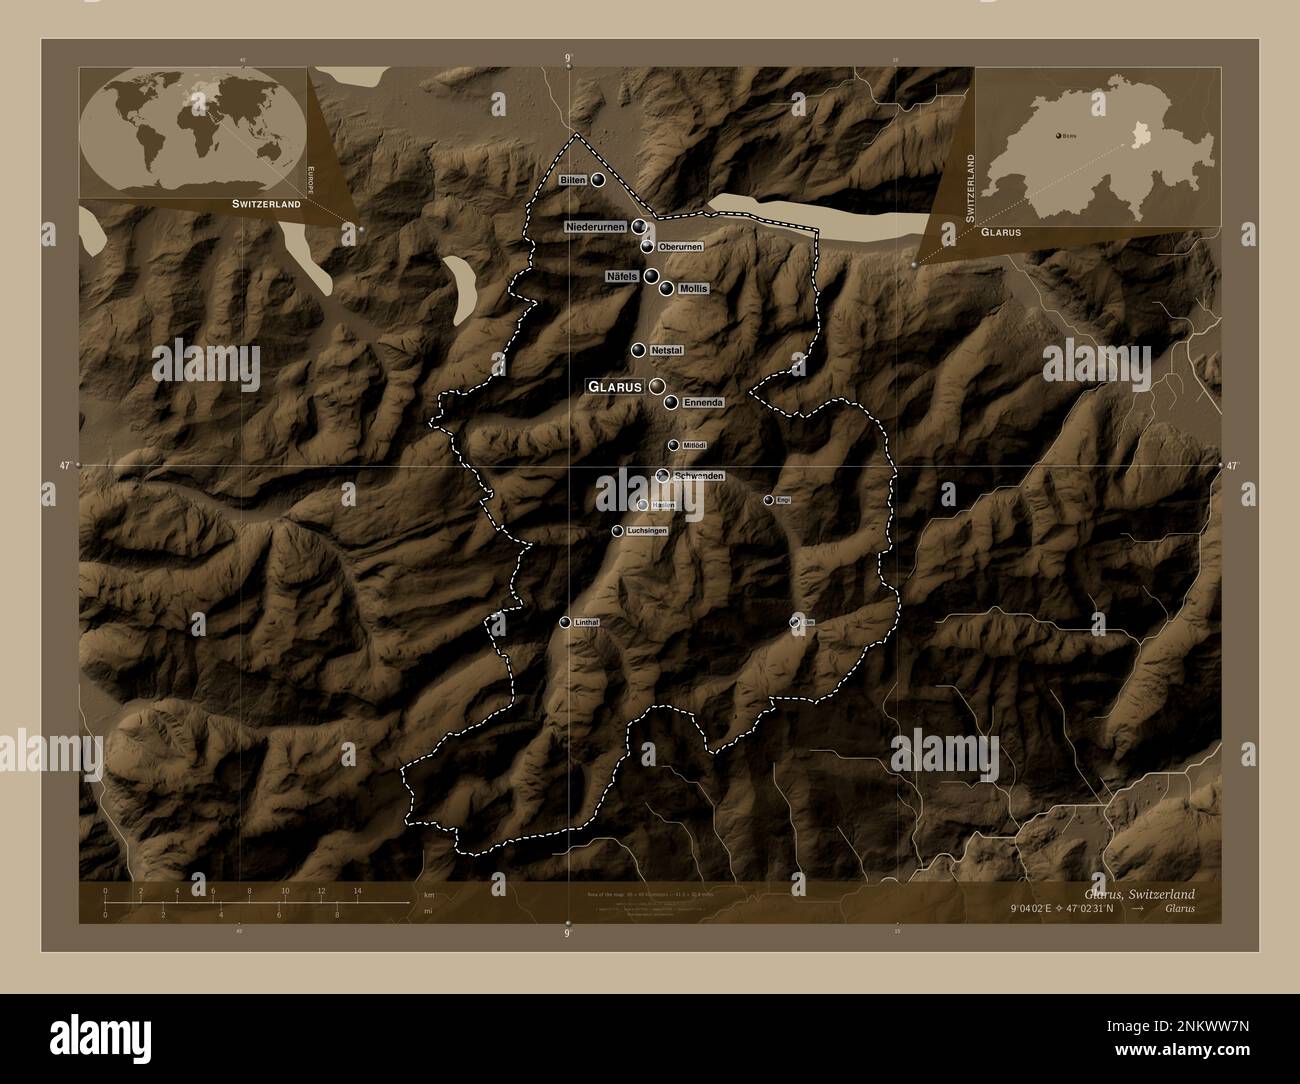 Glarus, canton of Switzerland. Elevation map colored in sepia tones with lakes and rivers. Locations and names of major cities of the region. Corner a Stock Photo